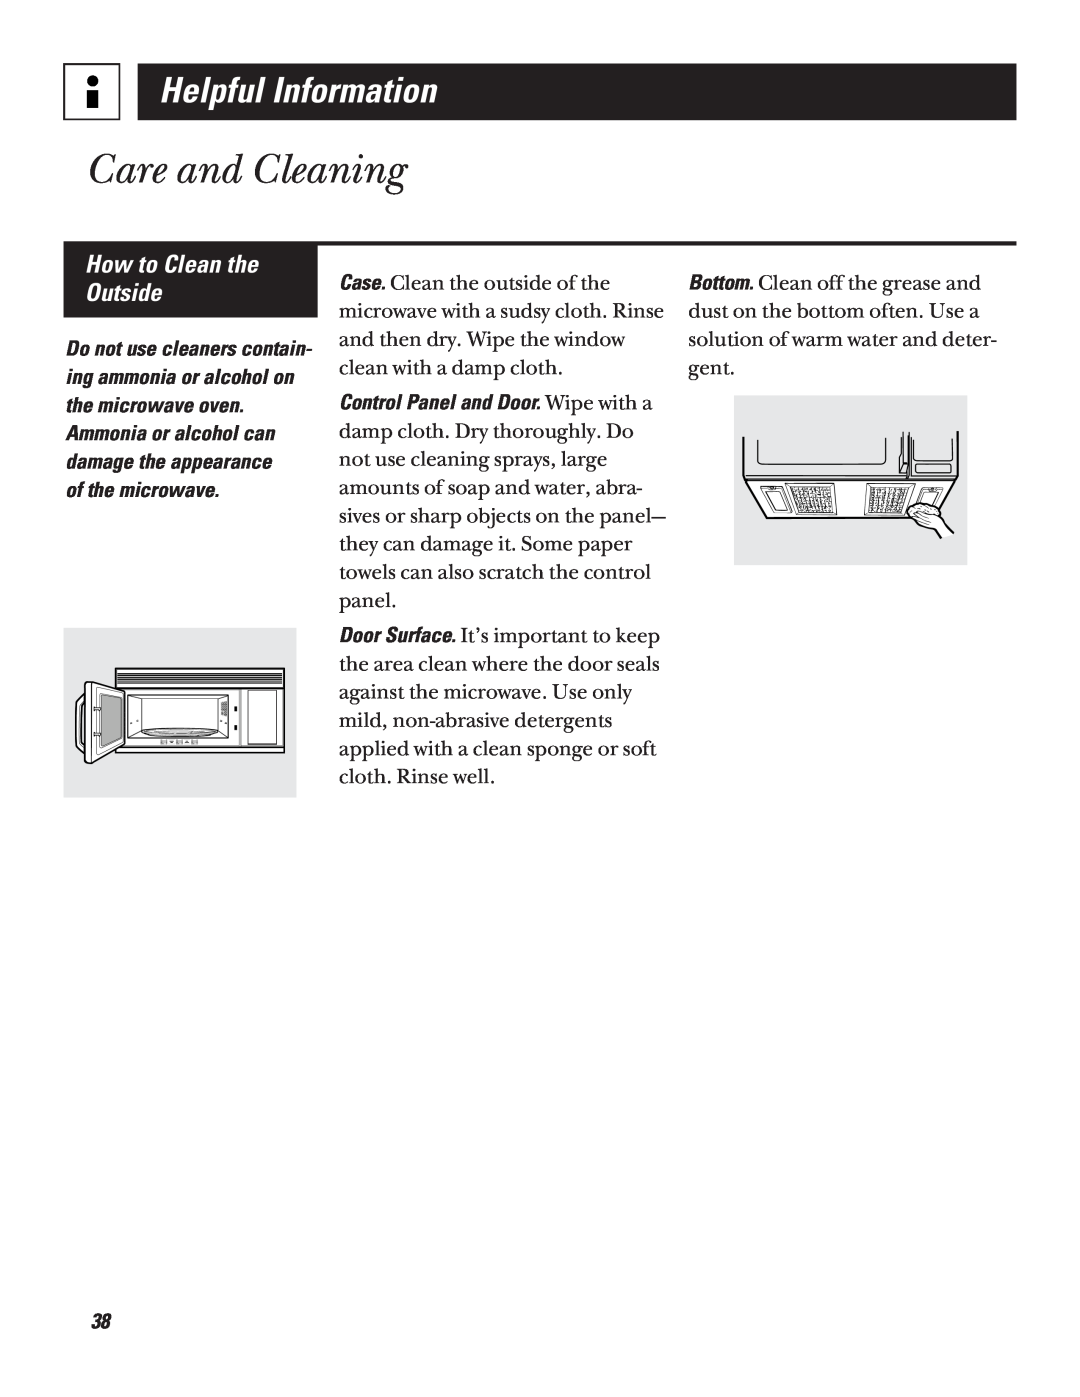 GE JVM1320 warranty How to Clean the Outside, Care and Cleaning, Helpful Information 